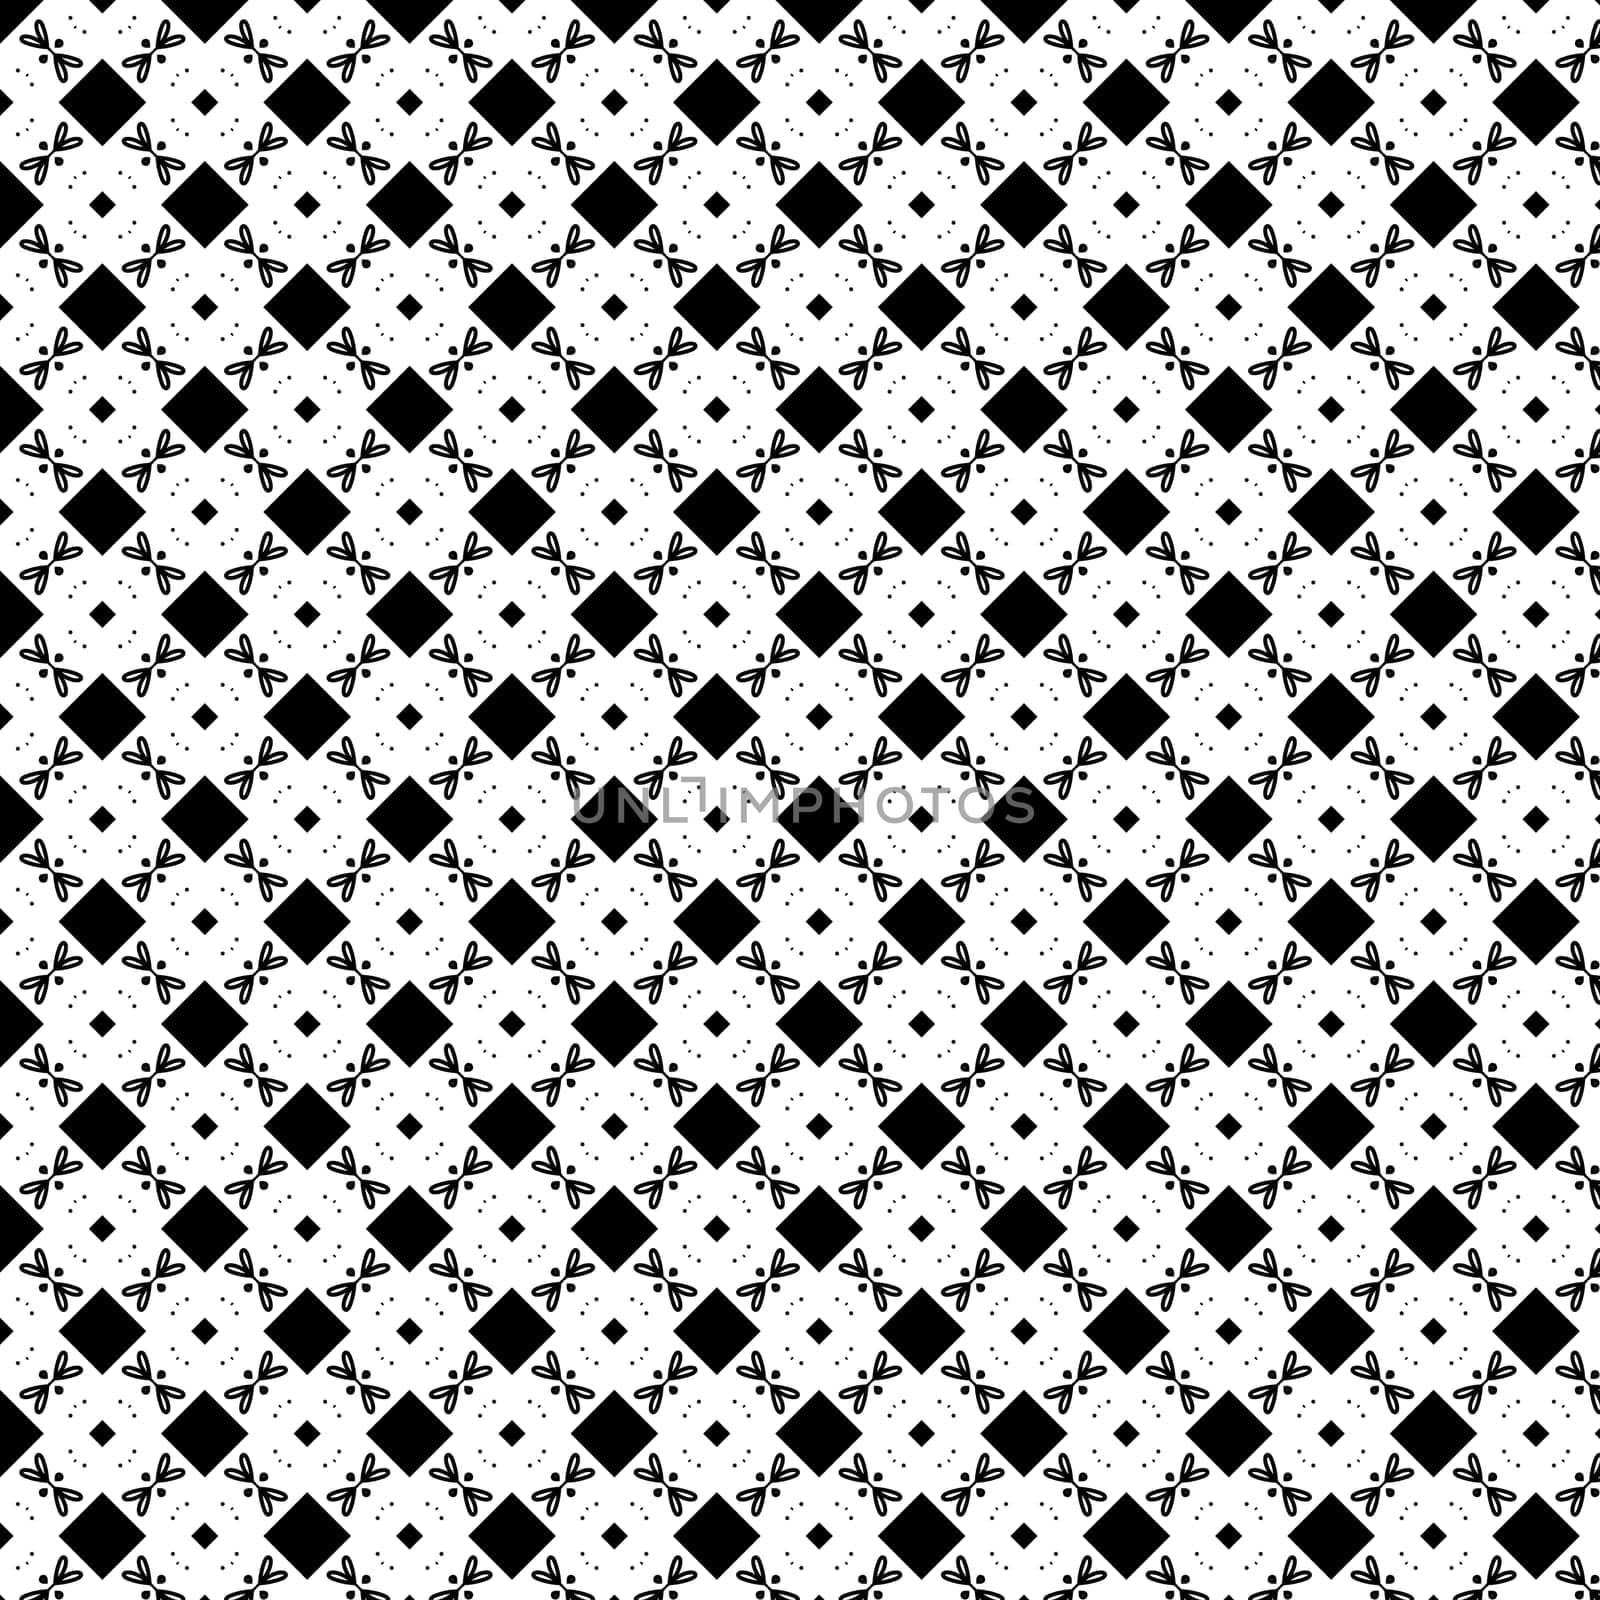 Abstract geometric shape pattern with black and white colour for background by iamnoonmai